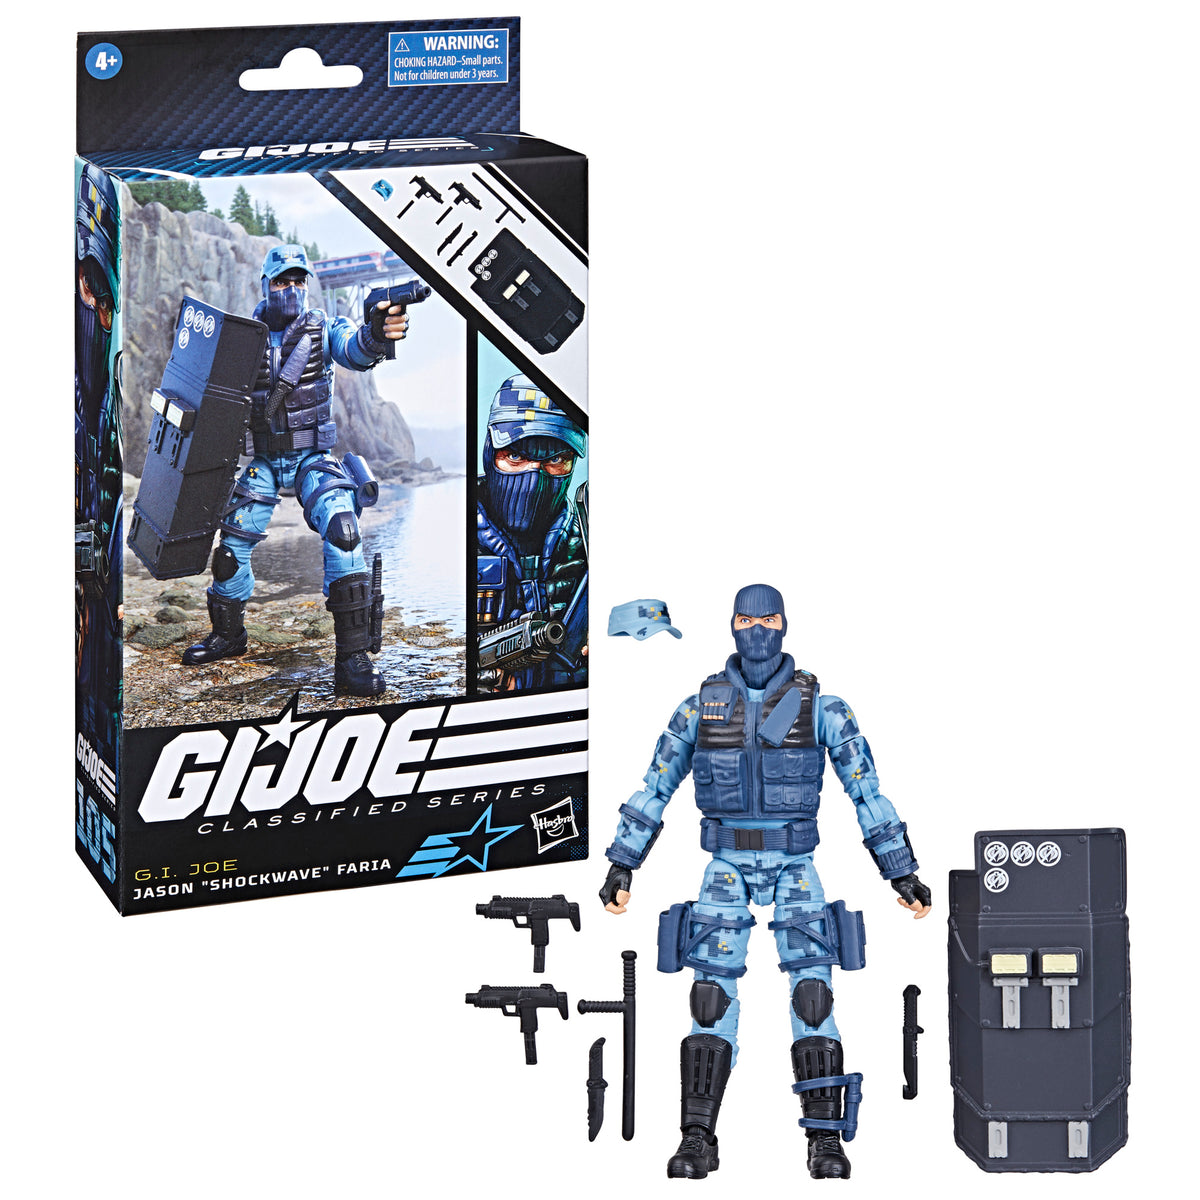 G.I. Joe Action Figure Accessories Lot Including 4 Articulated Action  Figure